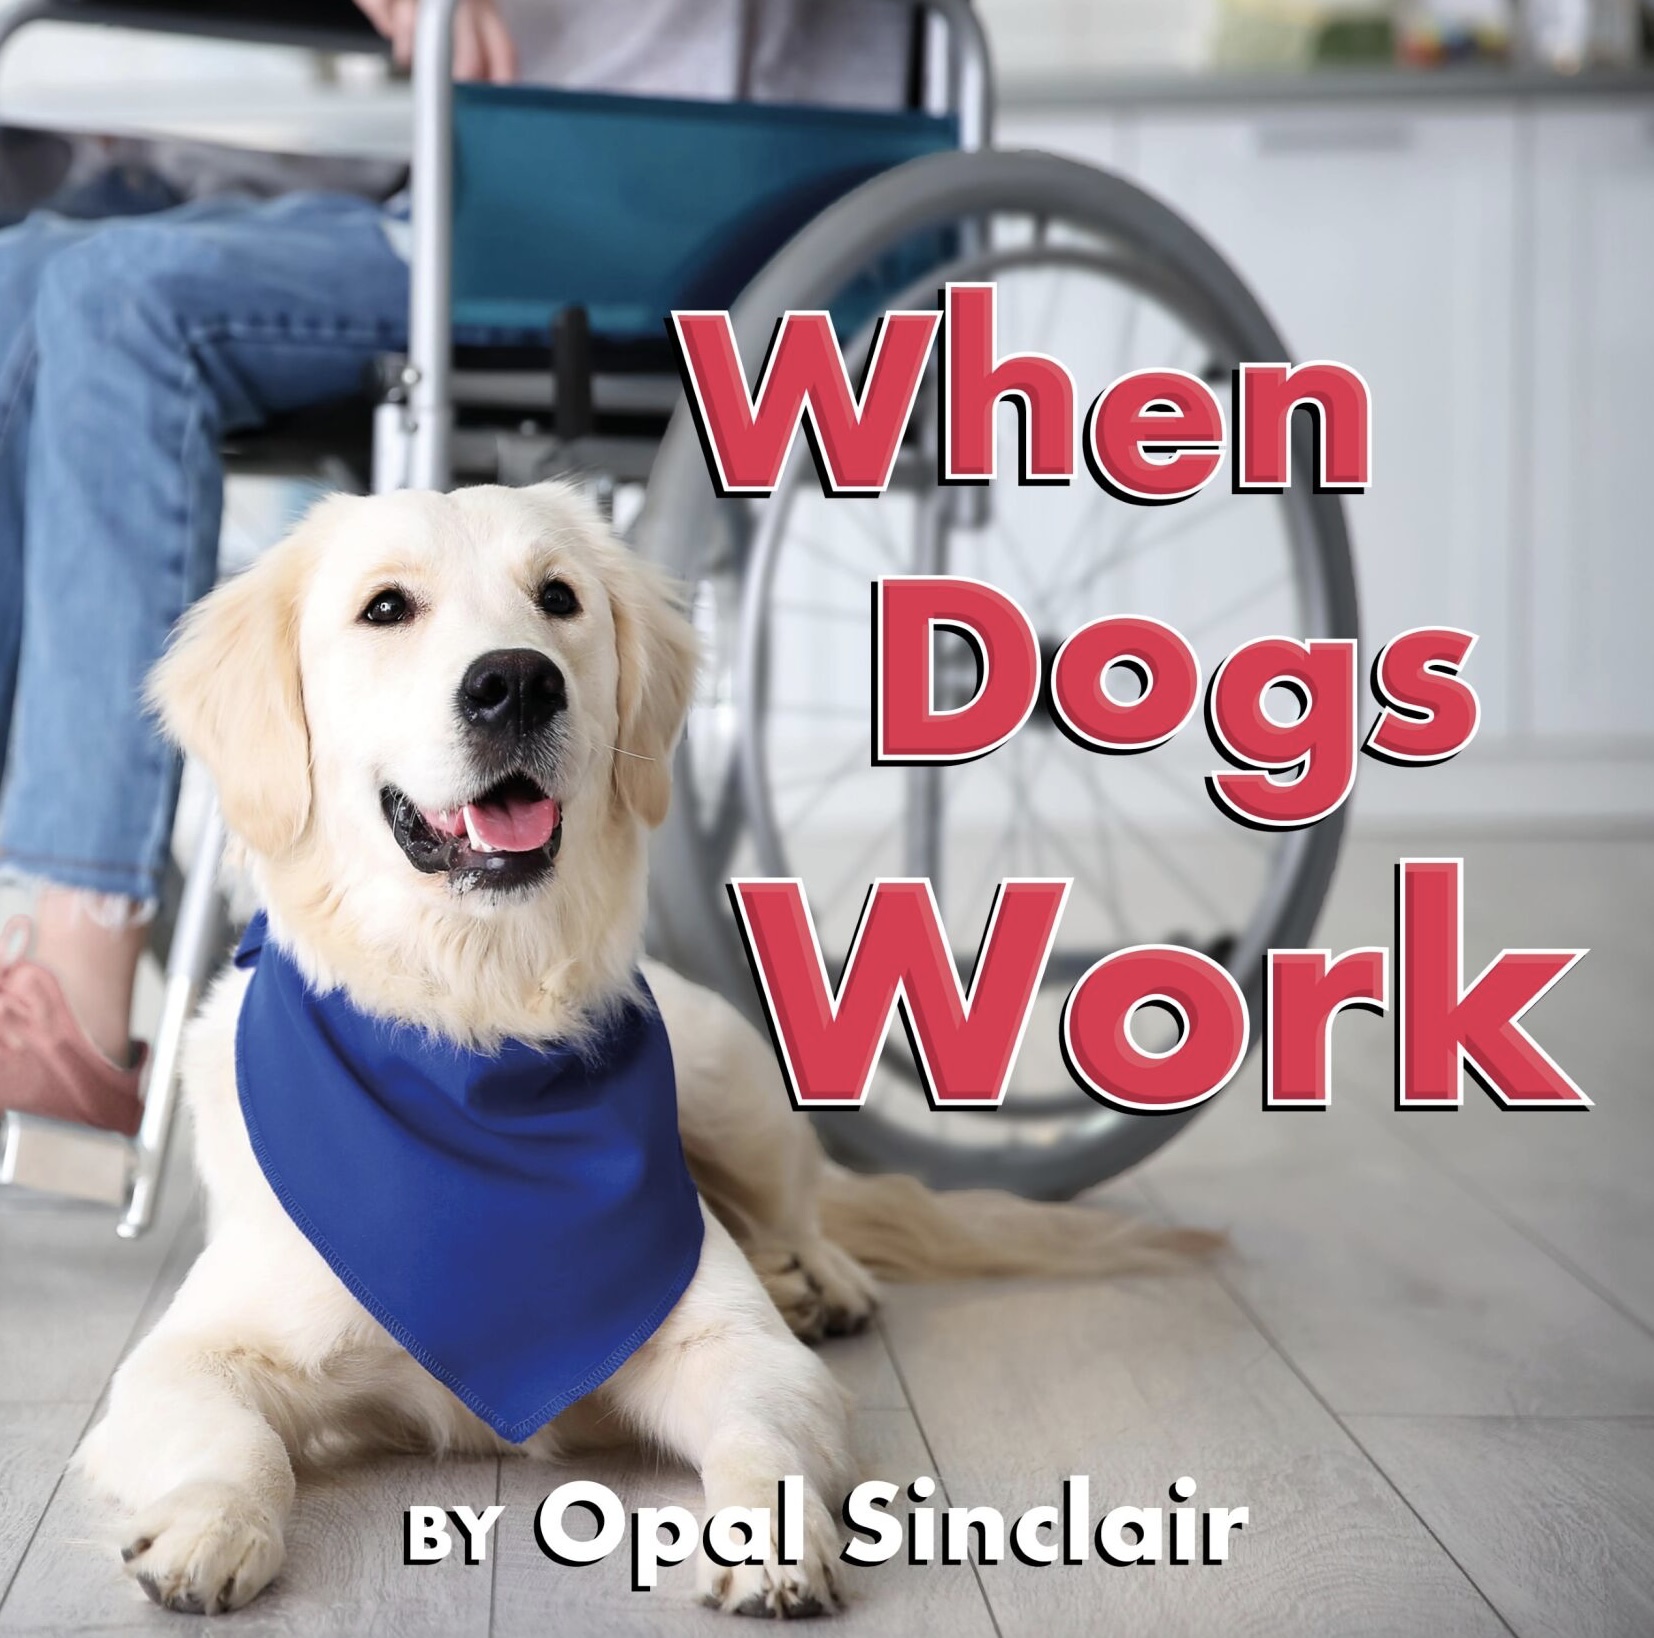 When Dogs Work by Opal Sinclair book cover